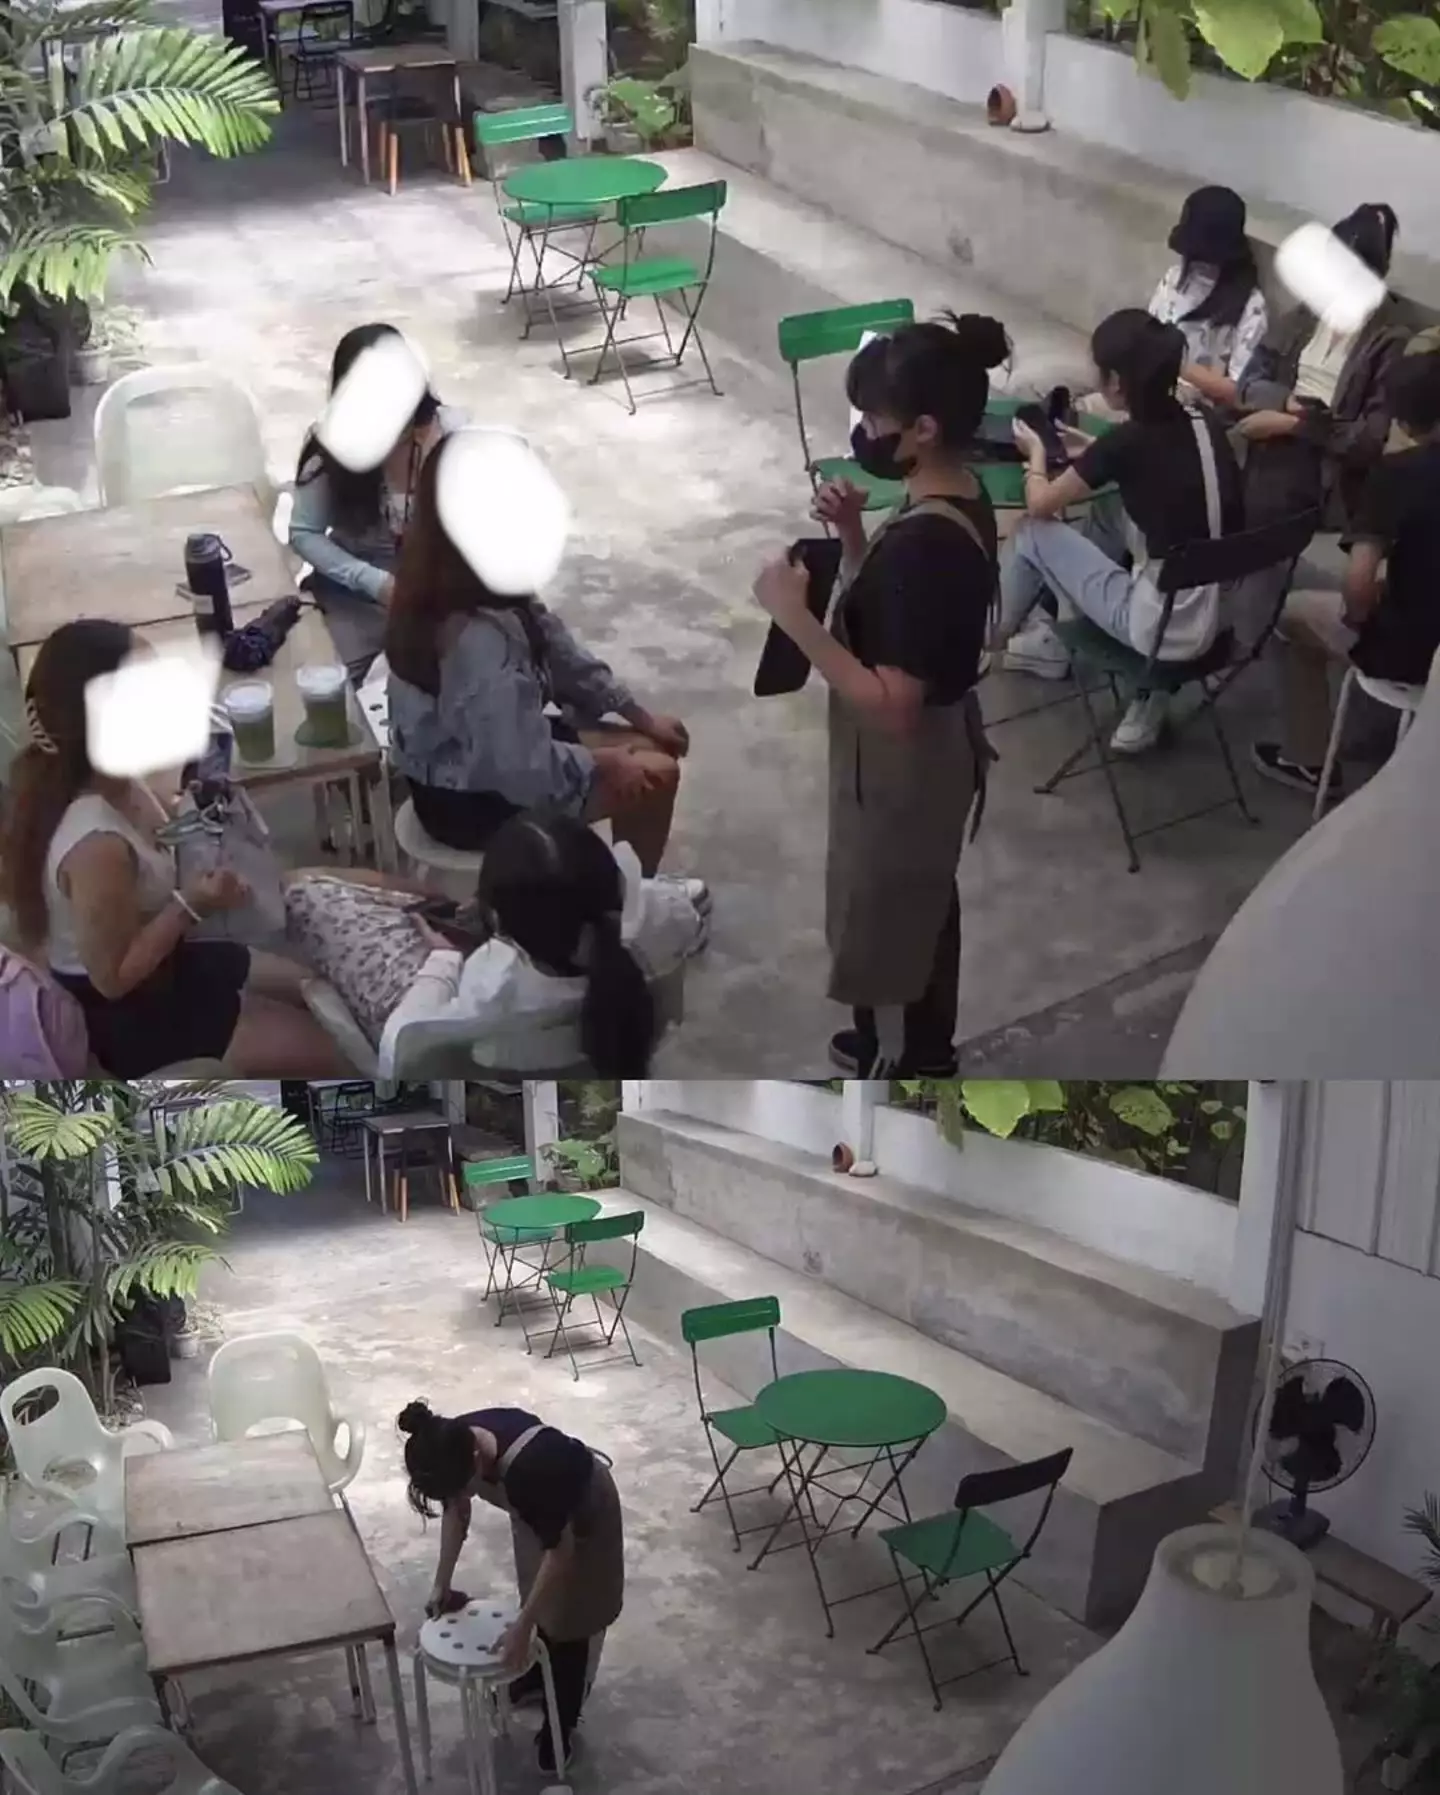 SLO BAR Cafe asked a group of students to leave who'd taken up three tables but only ordered two drinks.